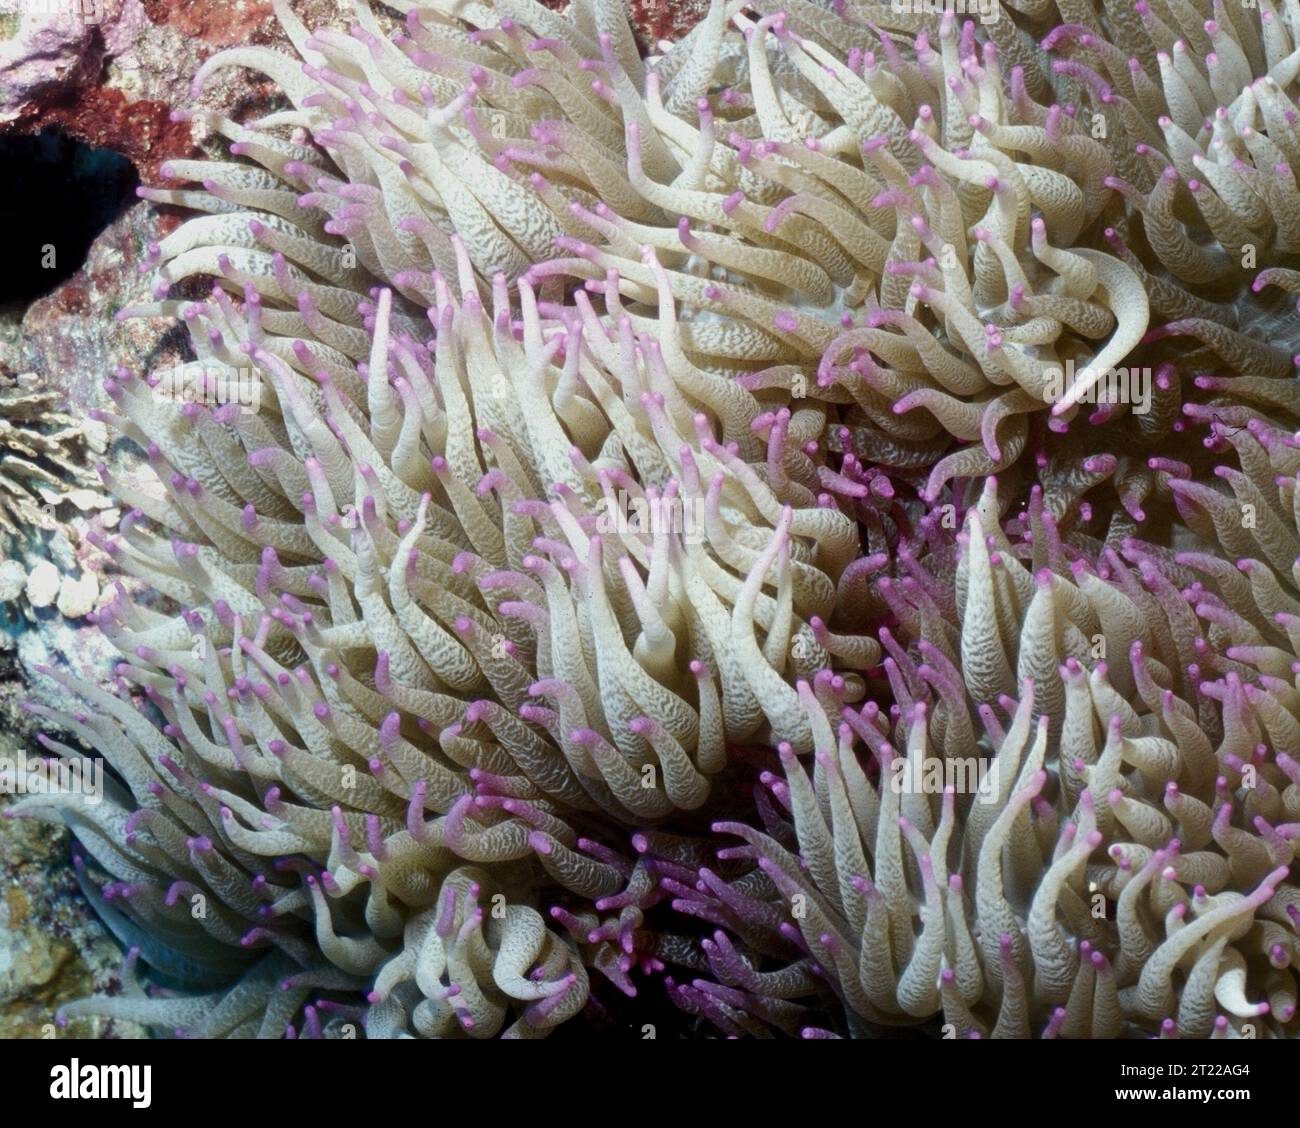 Heteractis Malu, a delicate sea anemone, waves its long purple-tipped tentacles at Kingman Reef National Wildlife Refuge in the Pacific, about 1,000 miles southwest of Honolulu. Subjects: Marine environments; Wildlife refuges. Location: Pacific Islands. Fish and Wildlife Service Site: KINGMAN REEF NATIONAL WILDLIFE REFUGE.  . 1998 - 2011. Stock Photo